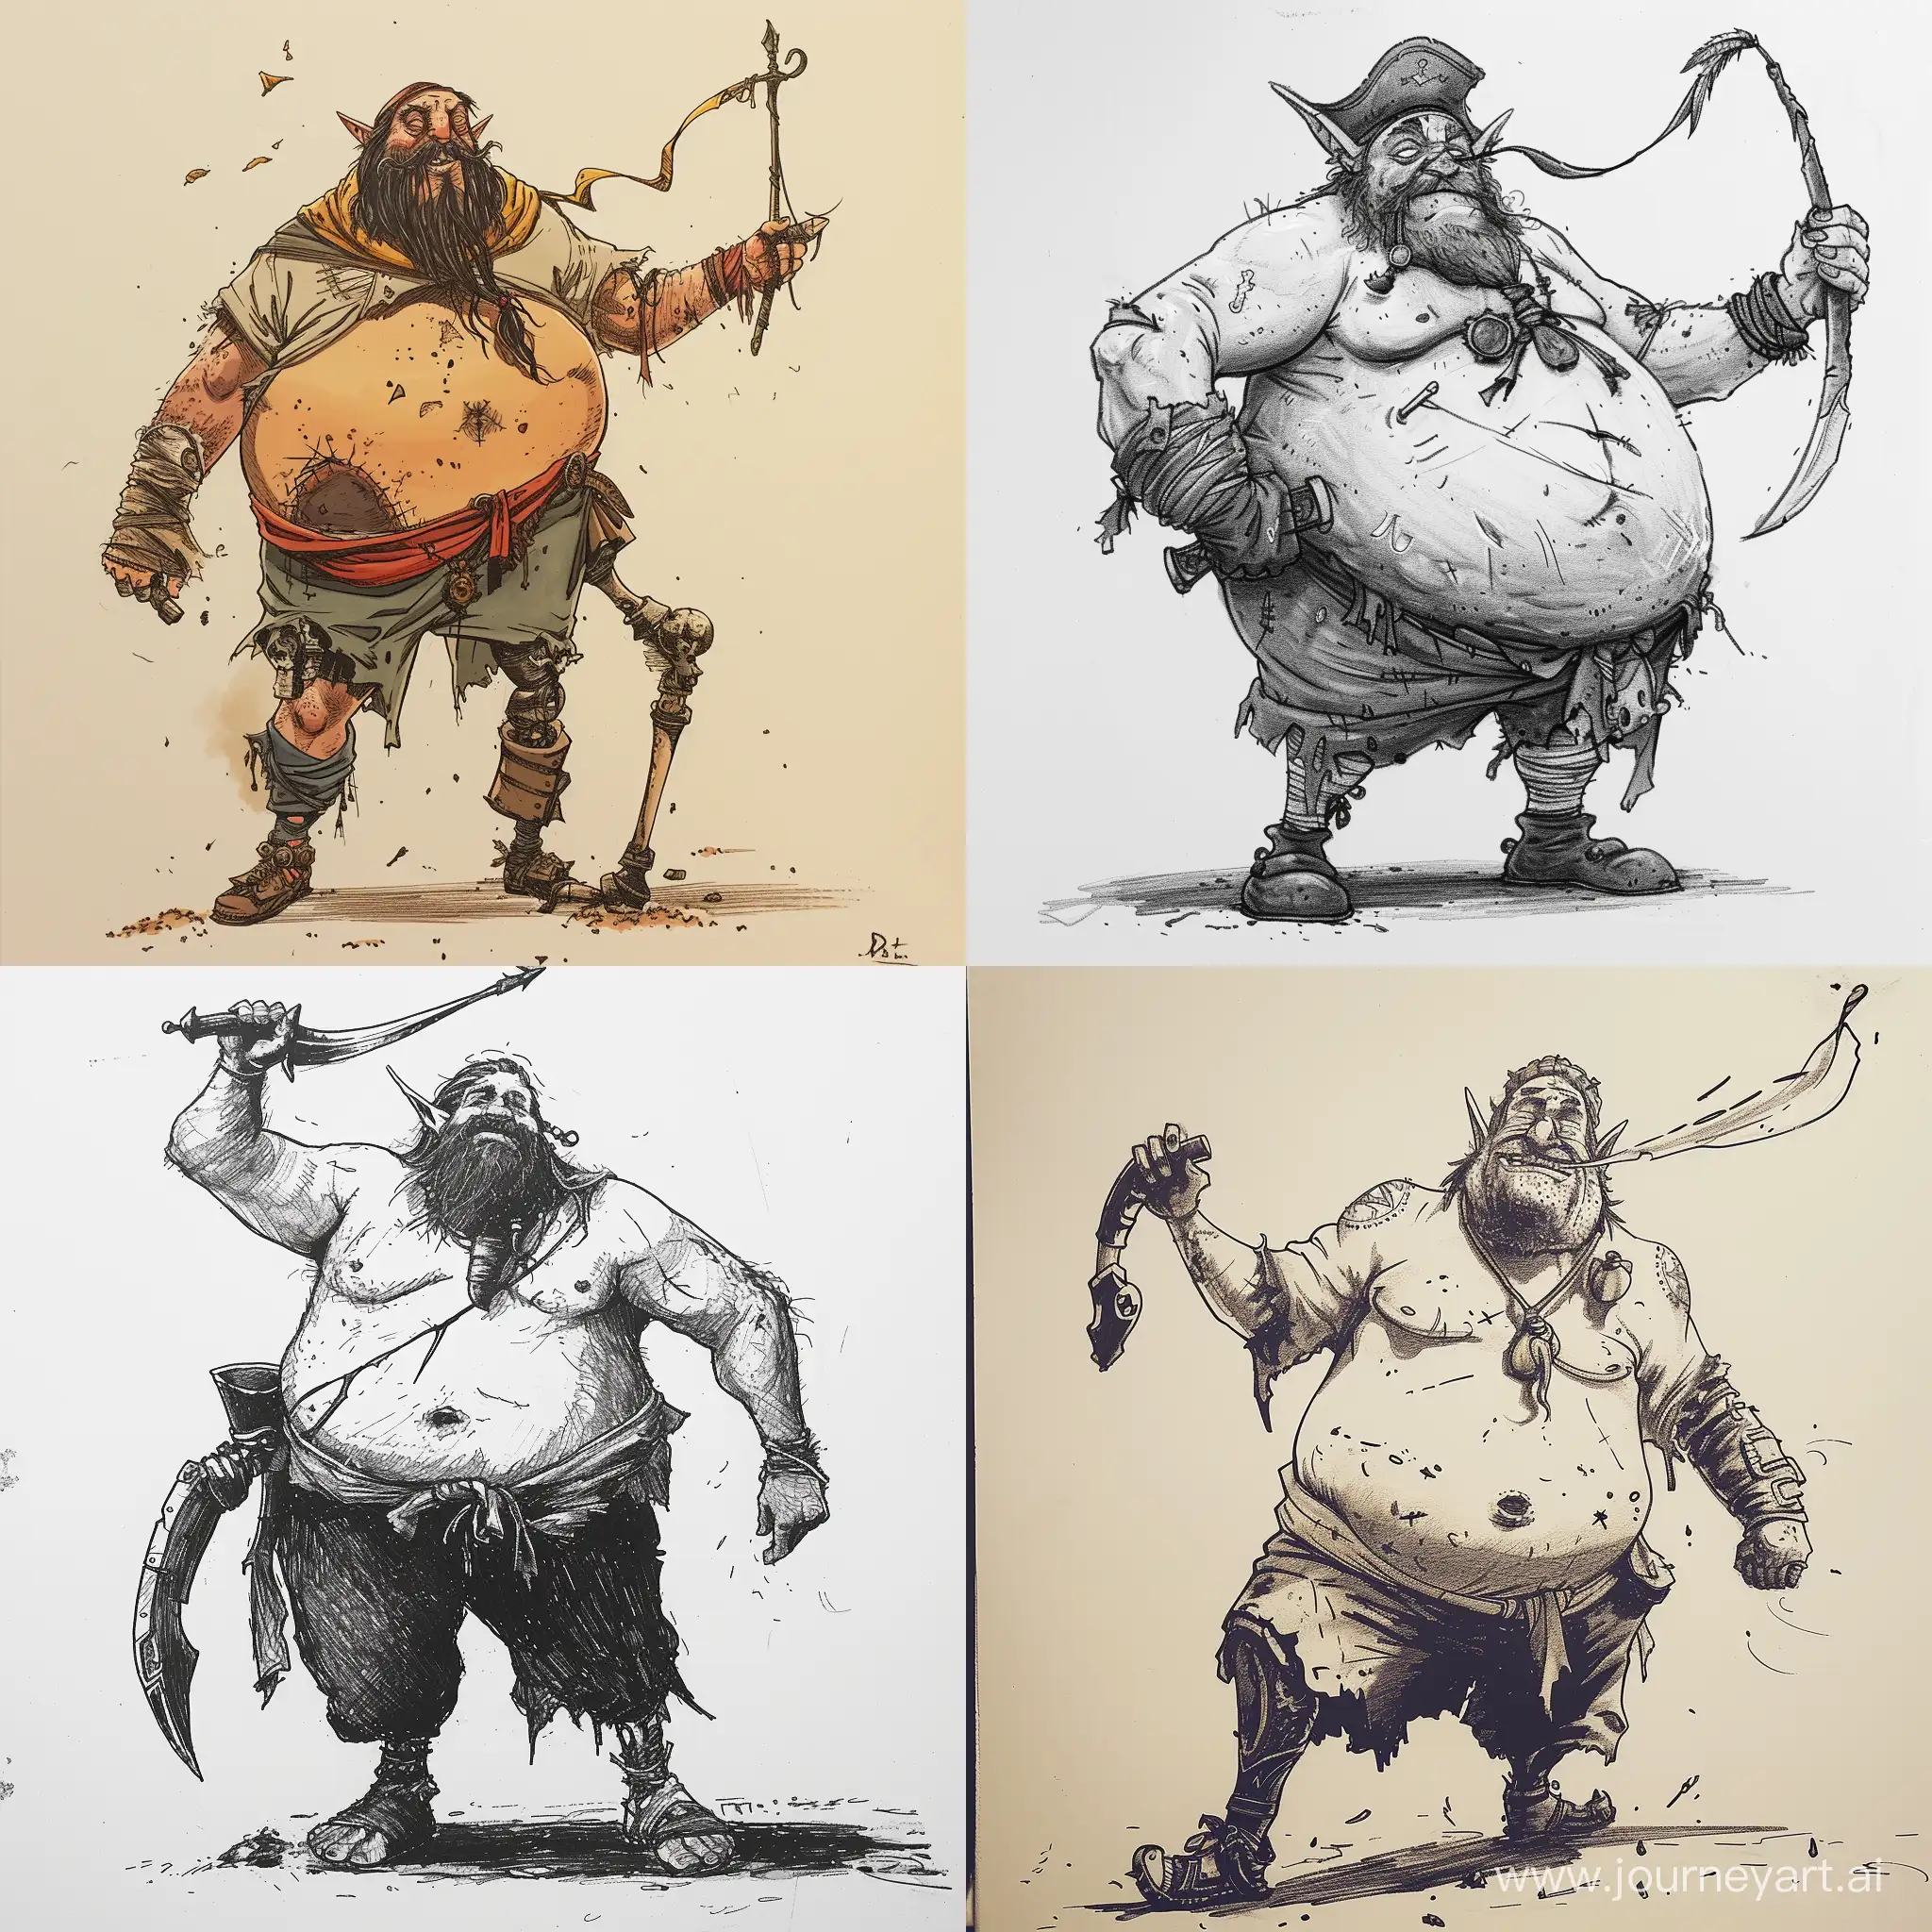 Rotund-Pirate-with-Prosthetic-Leg-and-Scimitar-in-MidAir